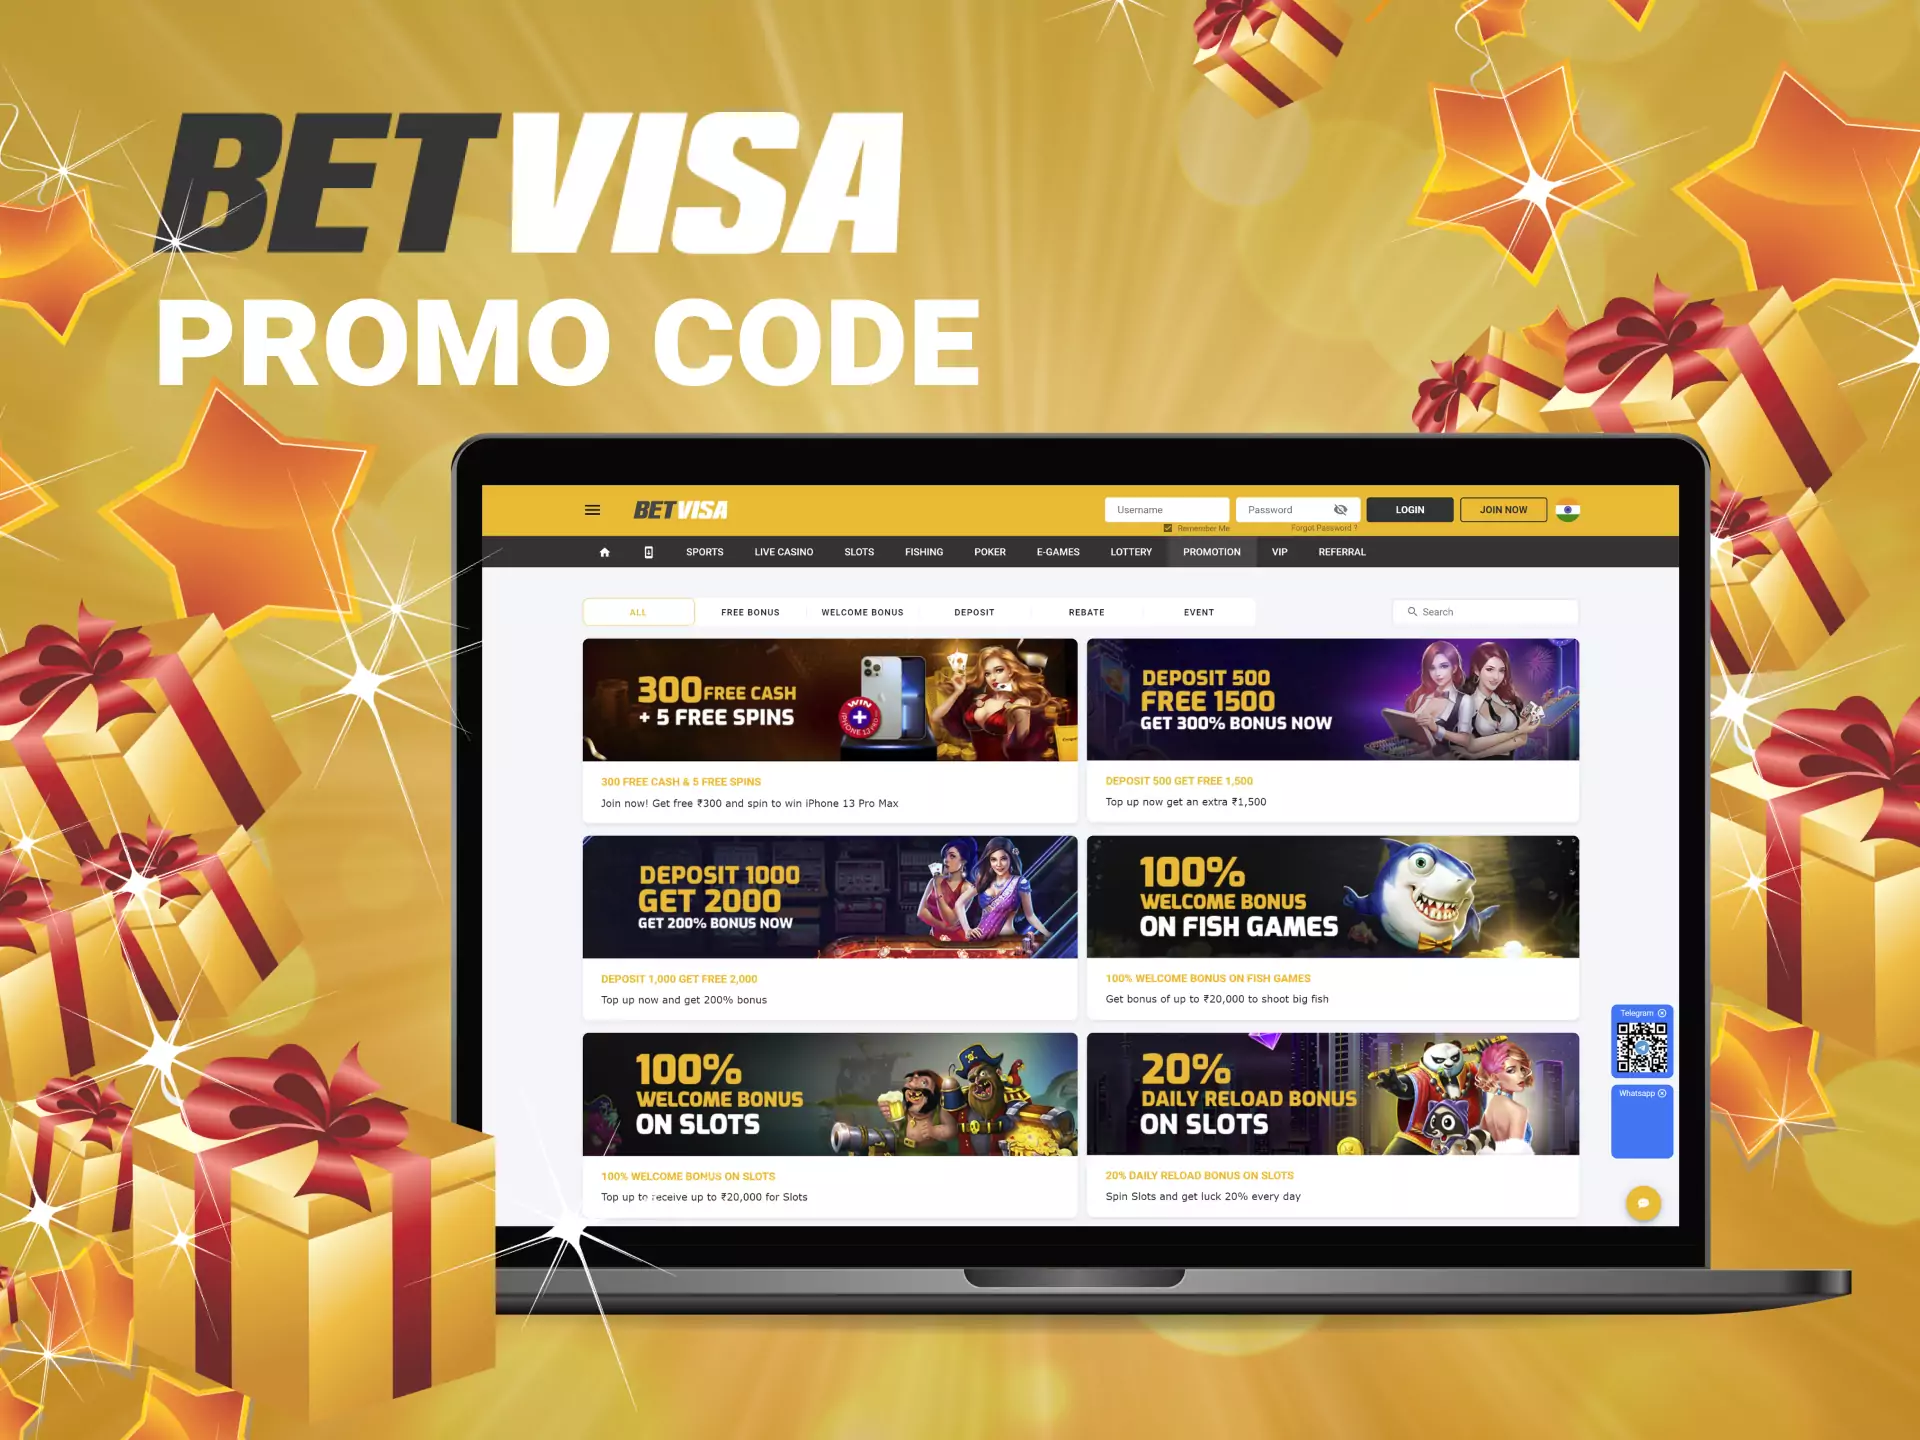 If you have a promo code for Betvisa, use it to increase your profit from betting.